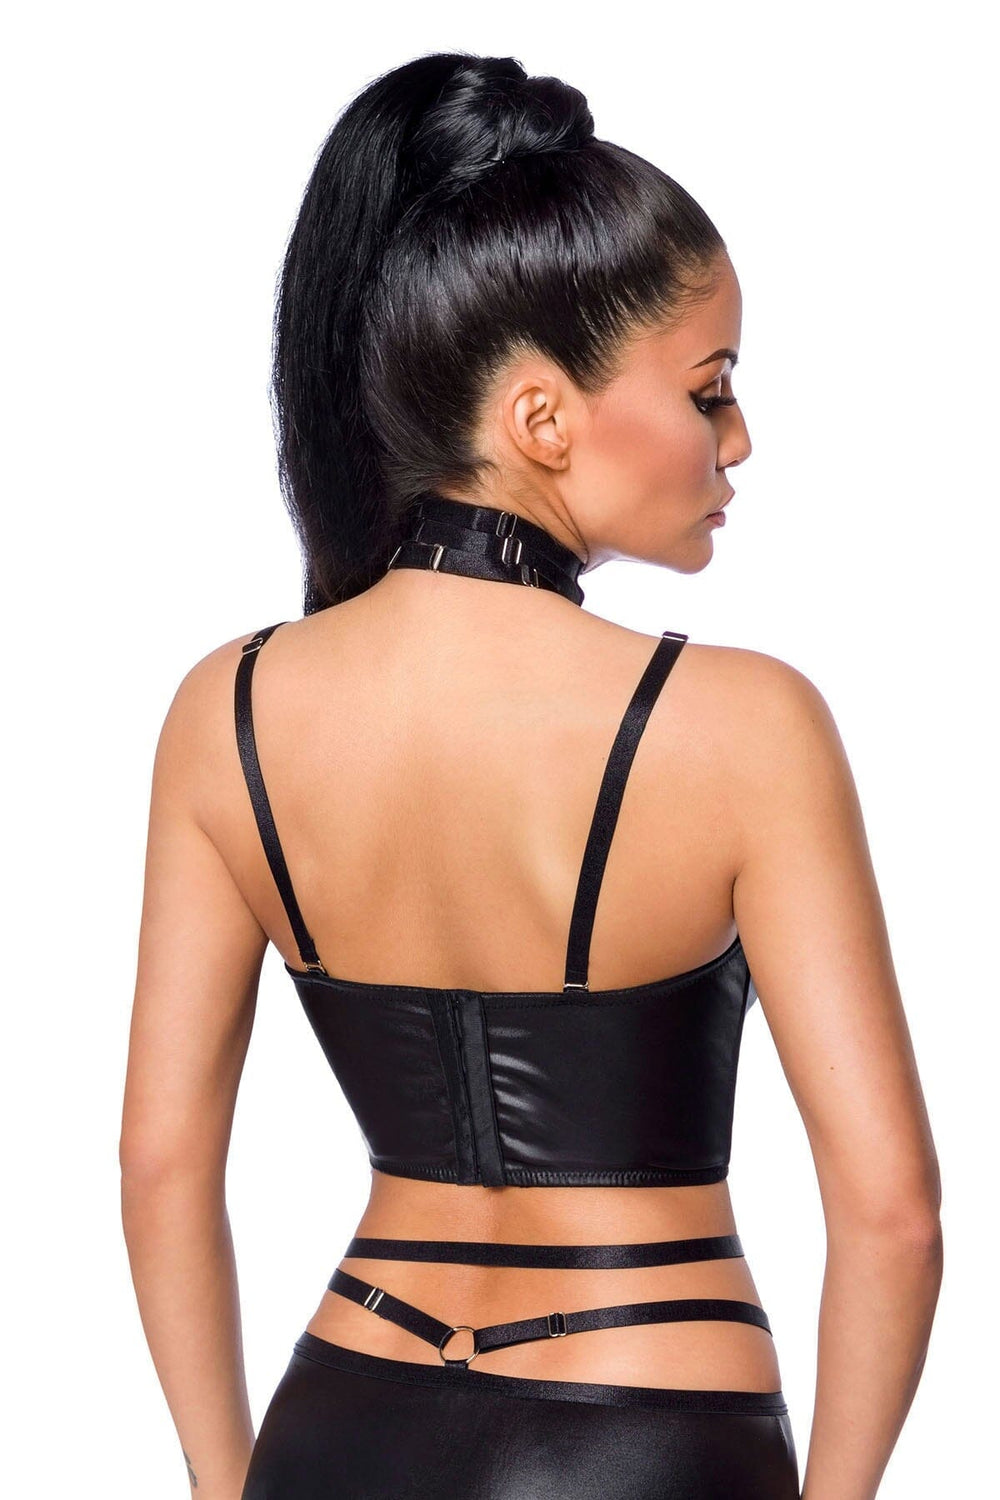 Multi-Strap Wetlook Crop Top With Skirt Set-Fetish Sets-Saresia-SEXYSHOES.COM